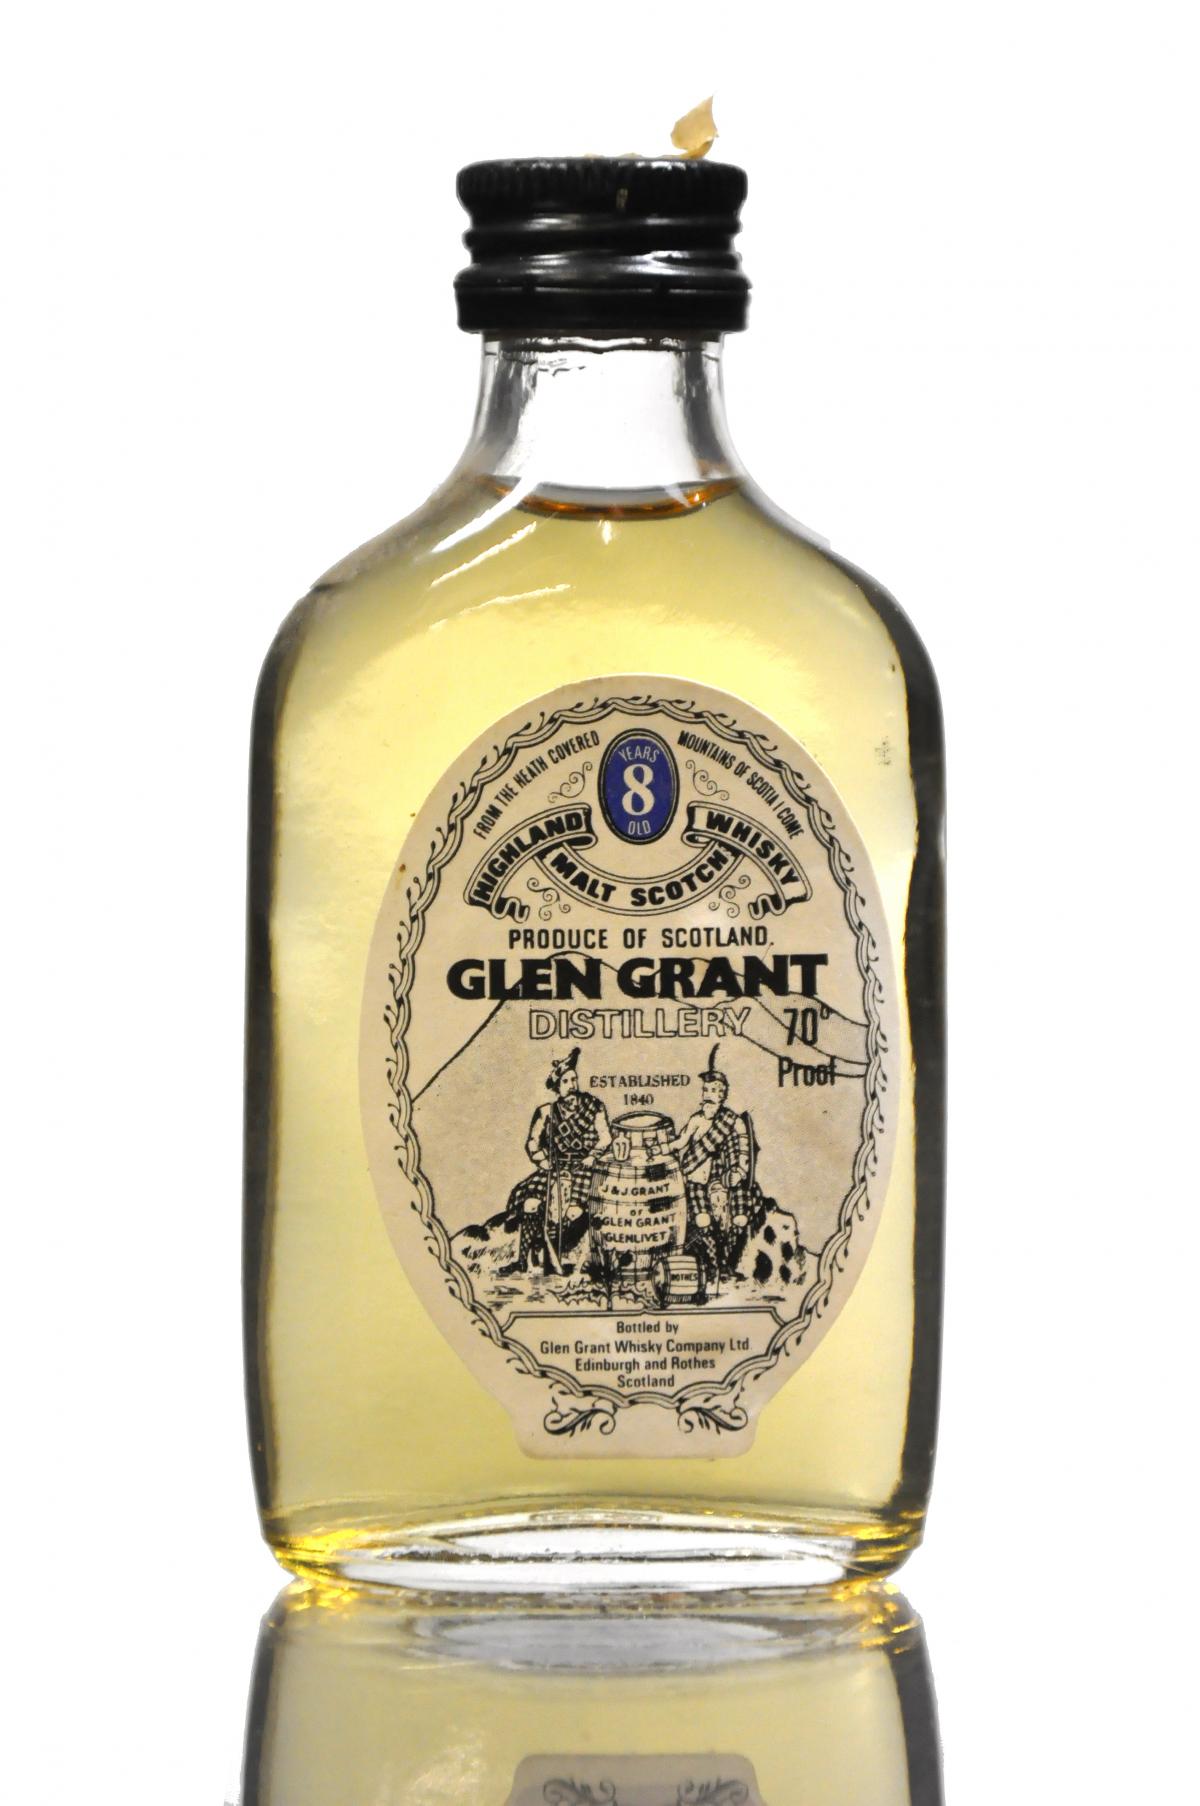 Glen Grant 8 Year Old - 70 Proof Miniature